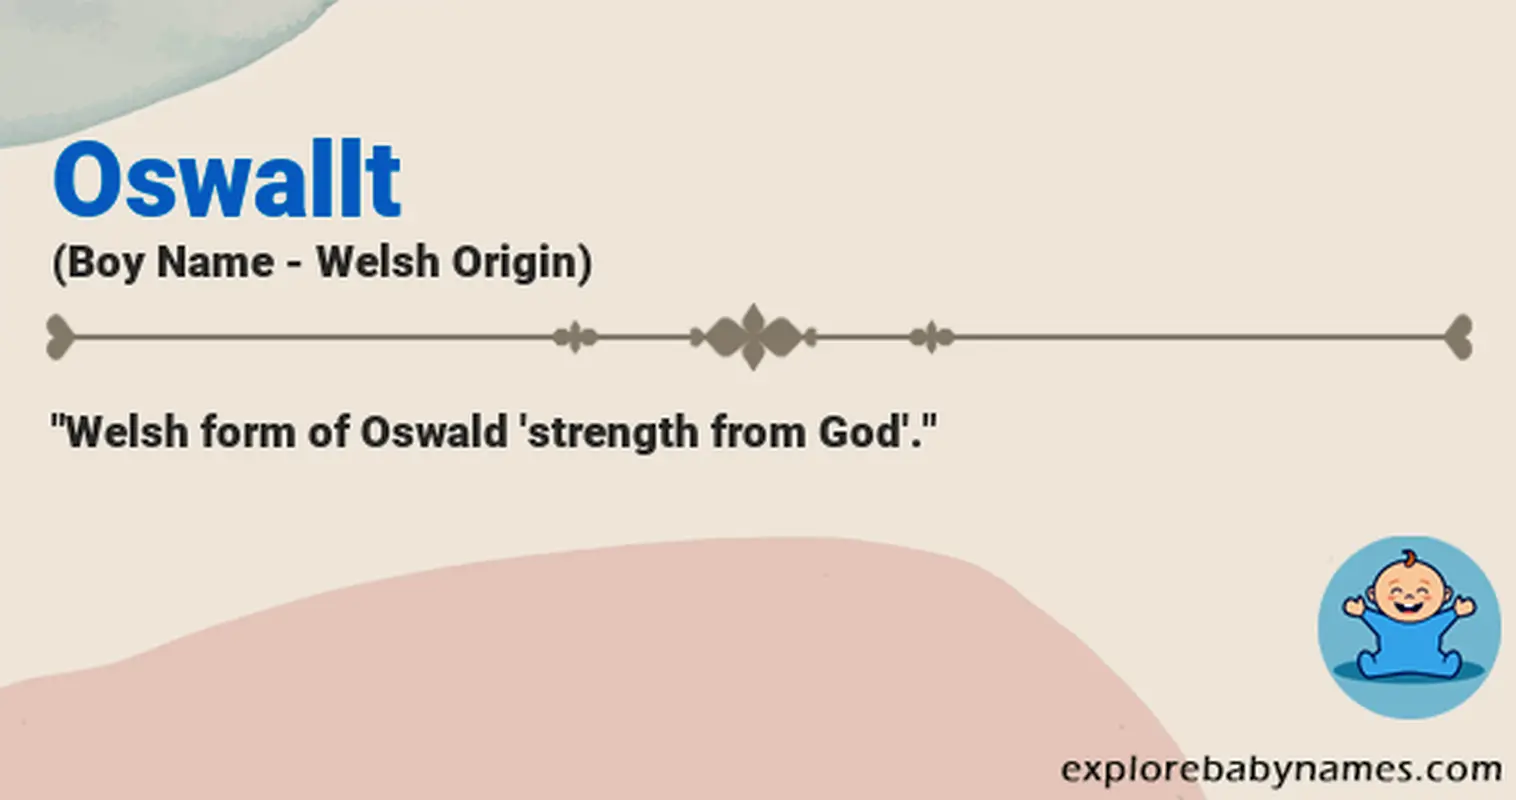 Meaning of Oswallt